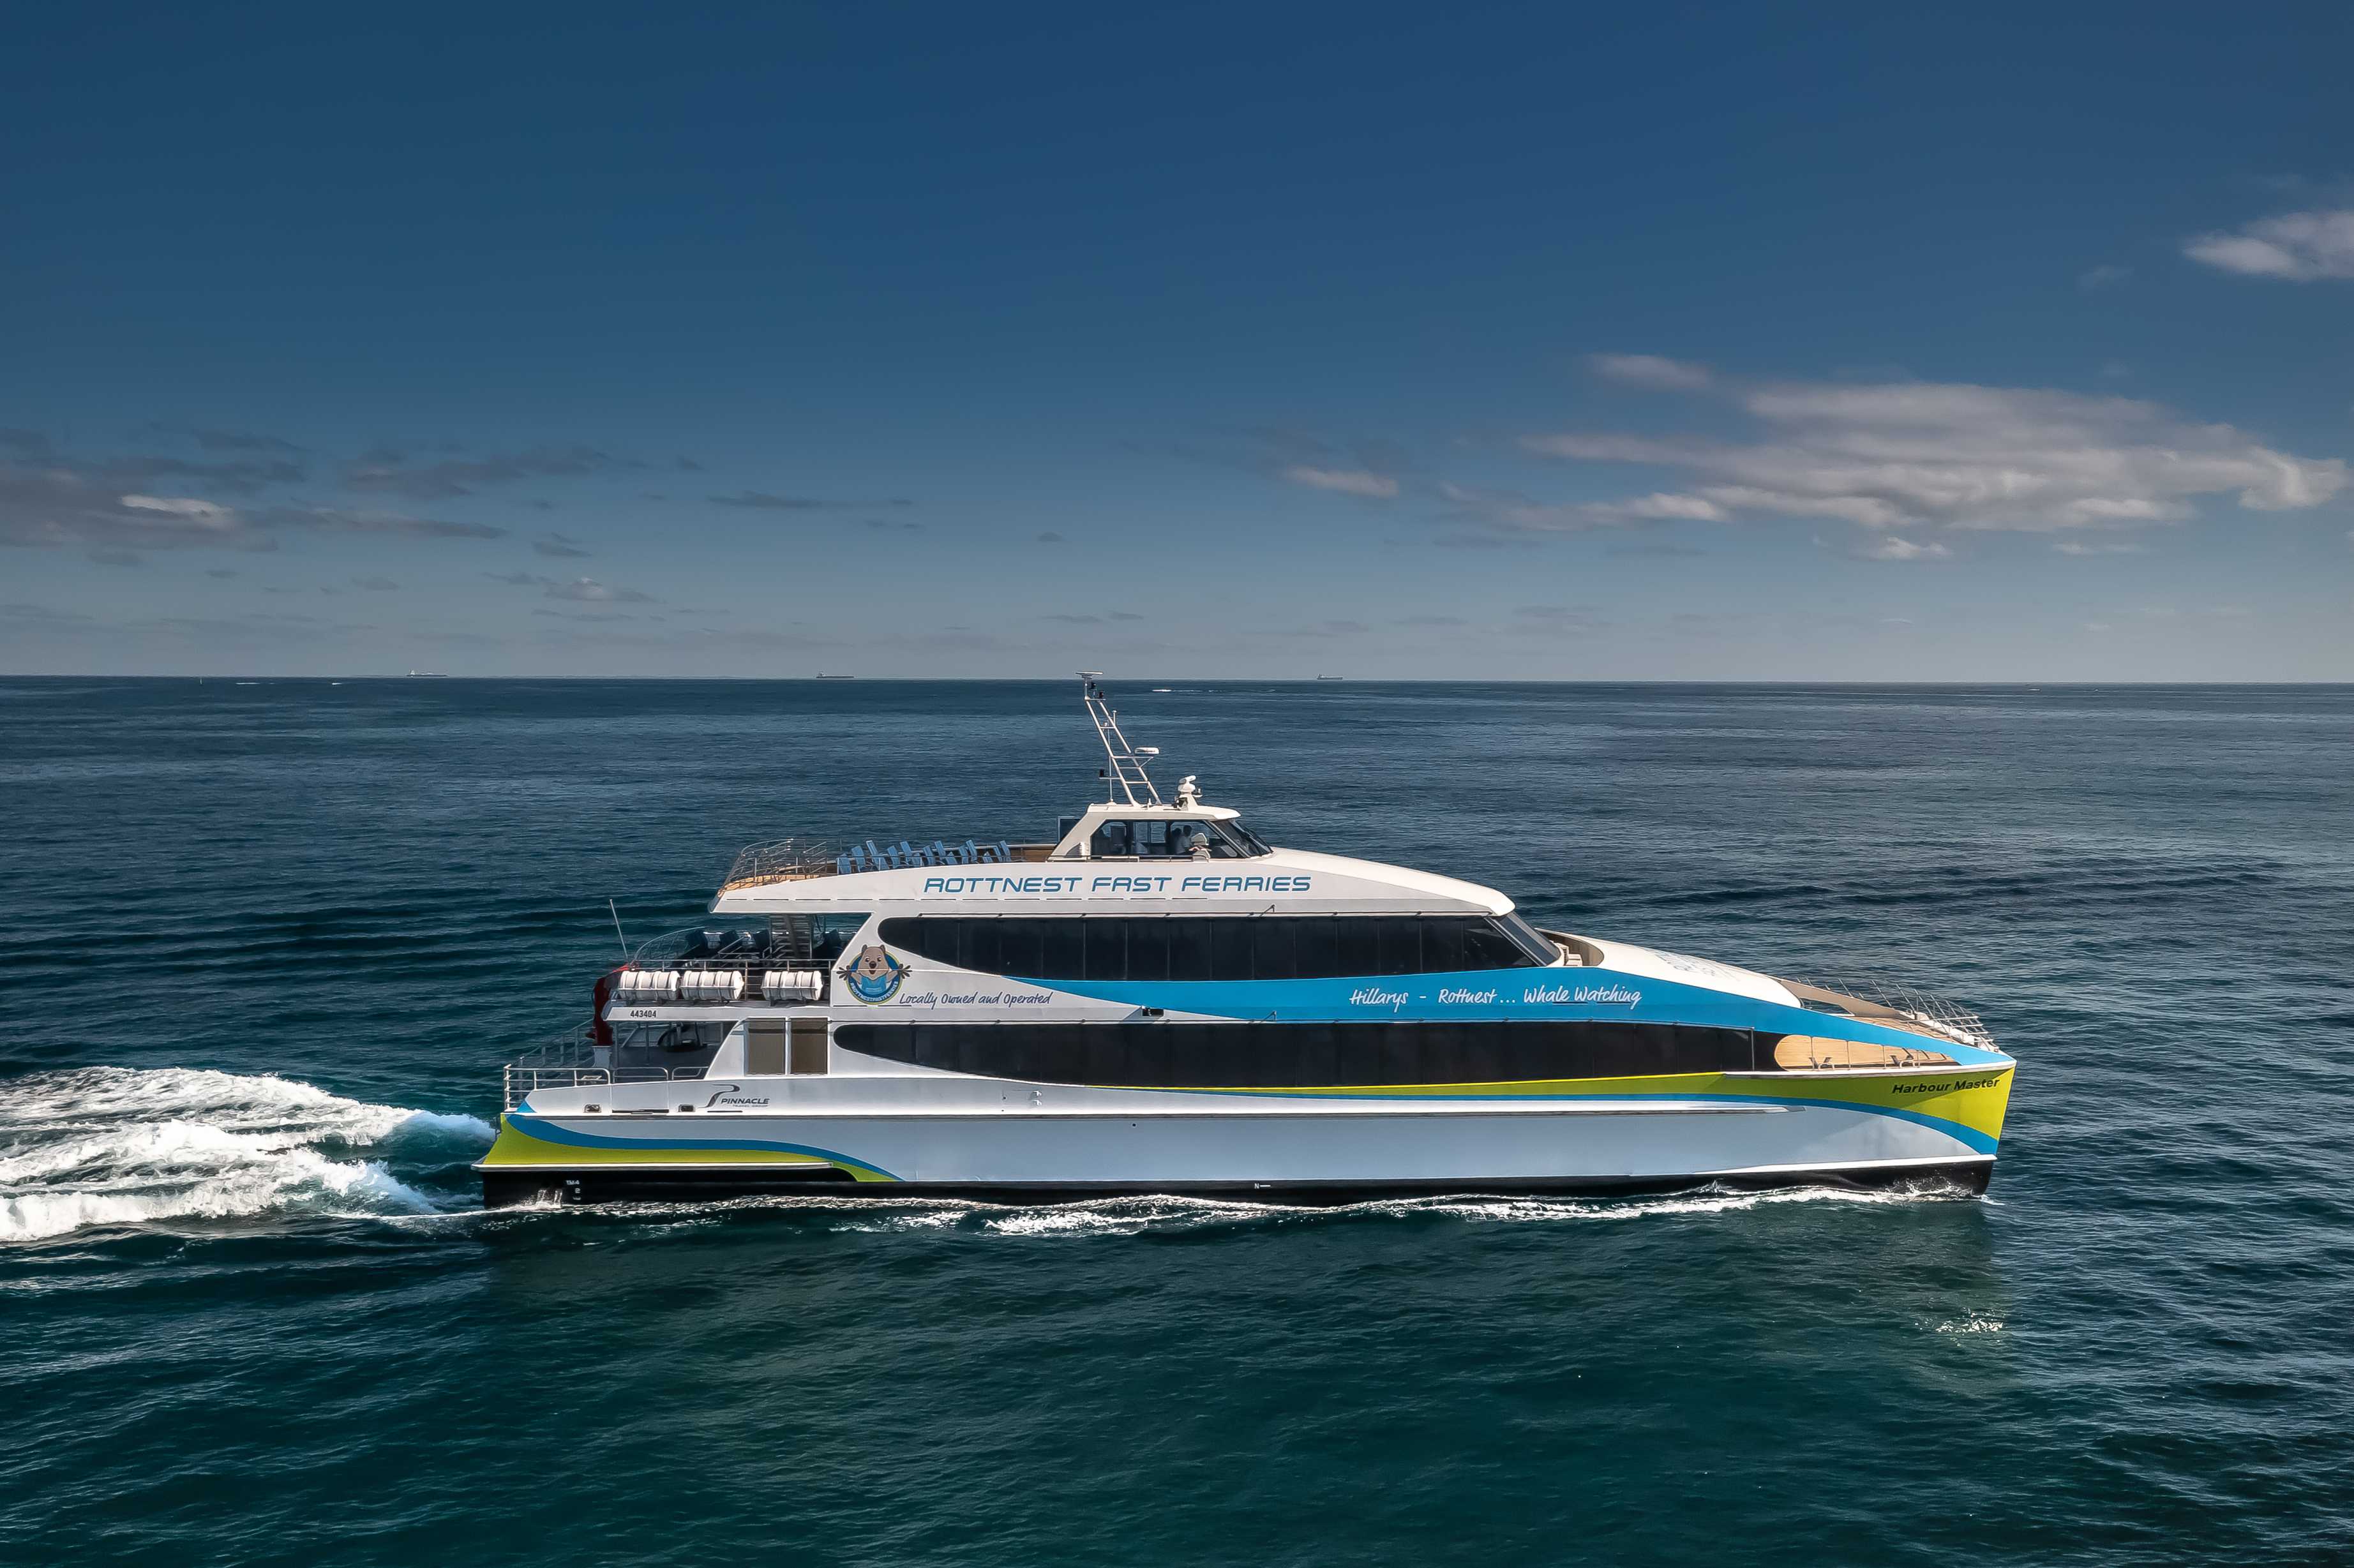 purchase a gift card for your next Rottnest Fast Ferries trip